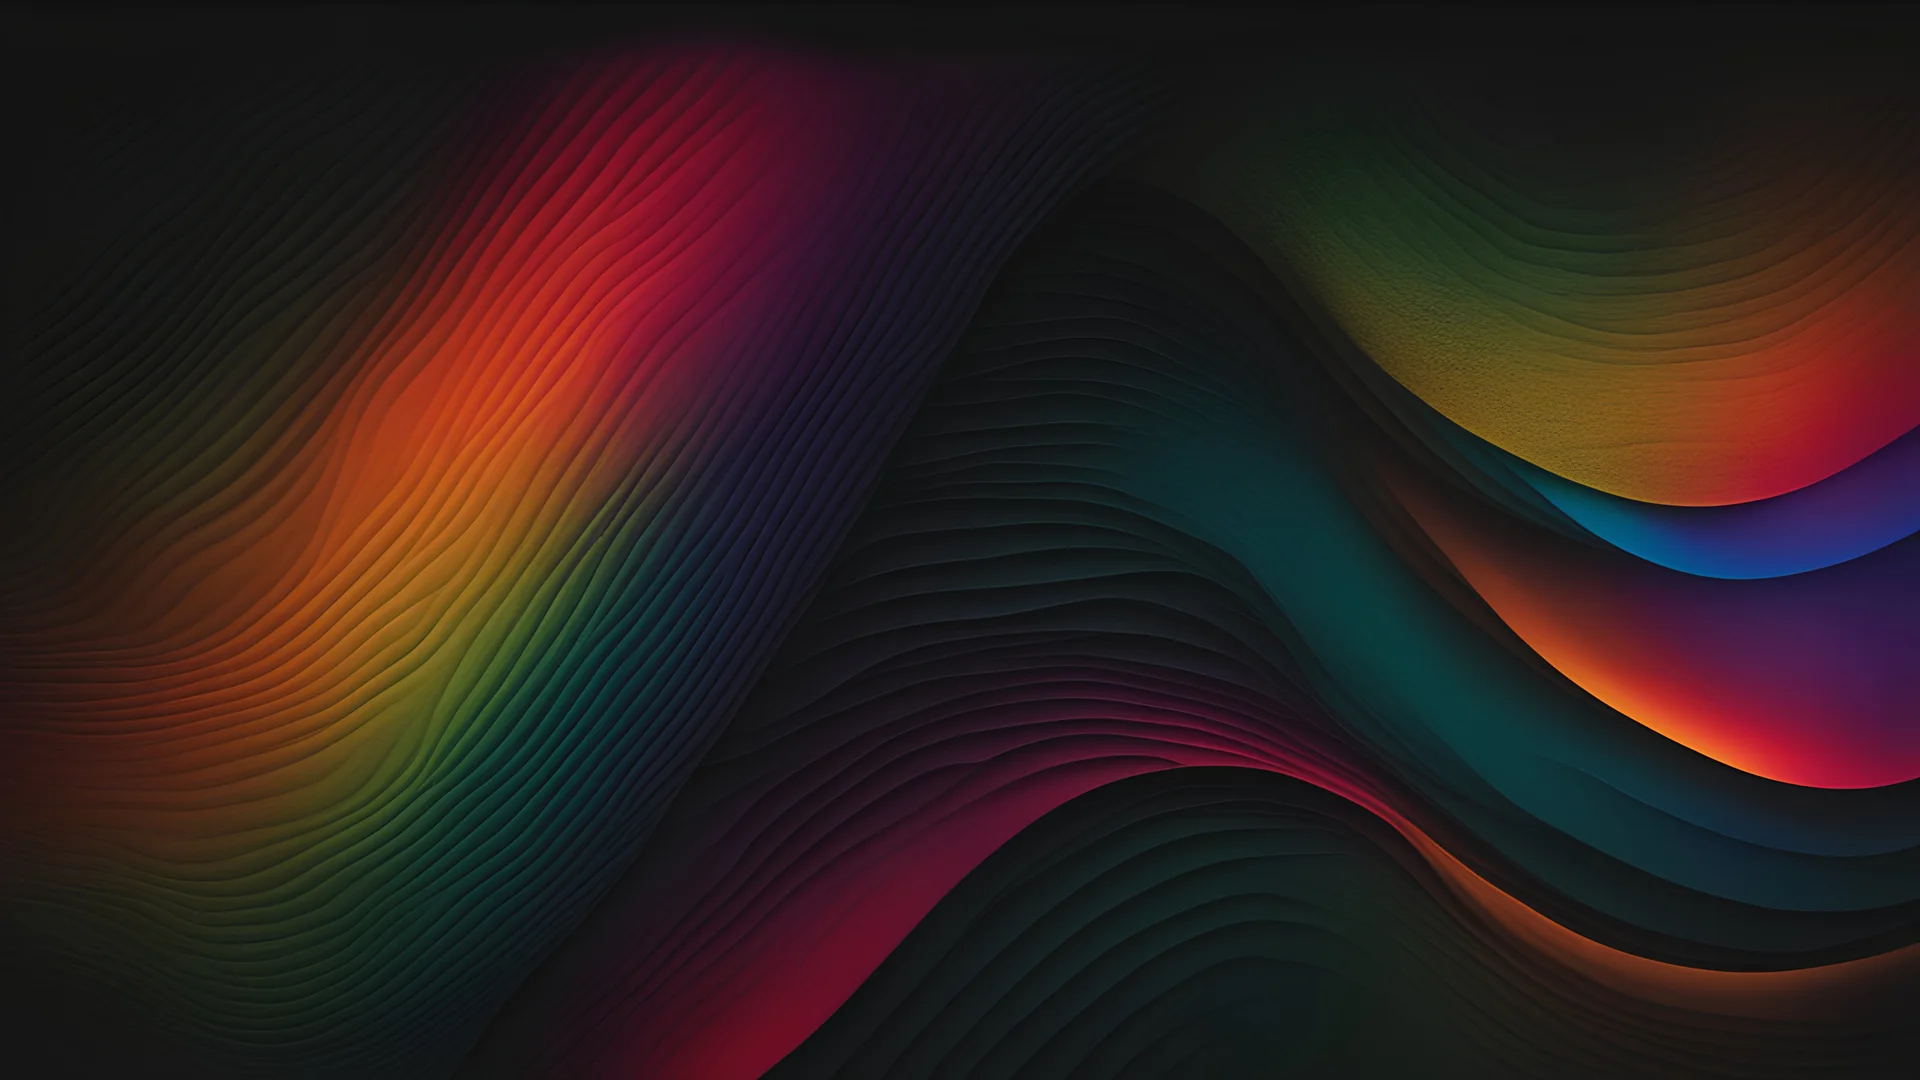 Vibrant color gradient on black grainy textured background, rainbow colors abstract banner, dark noise texture effect